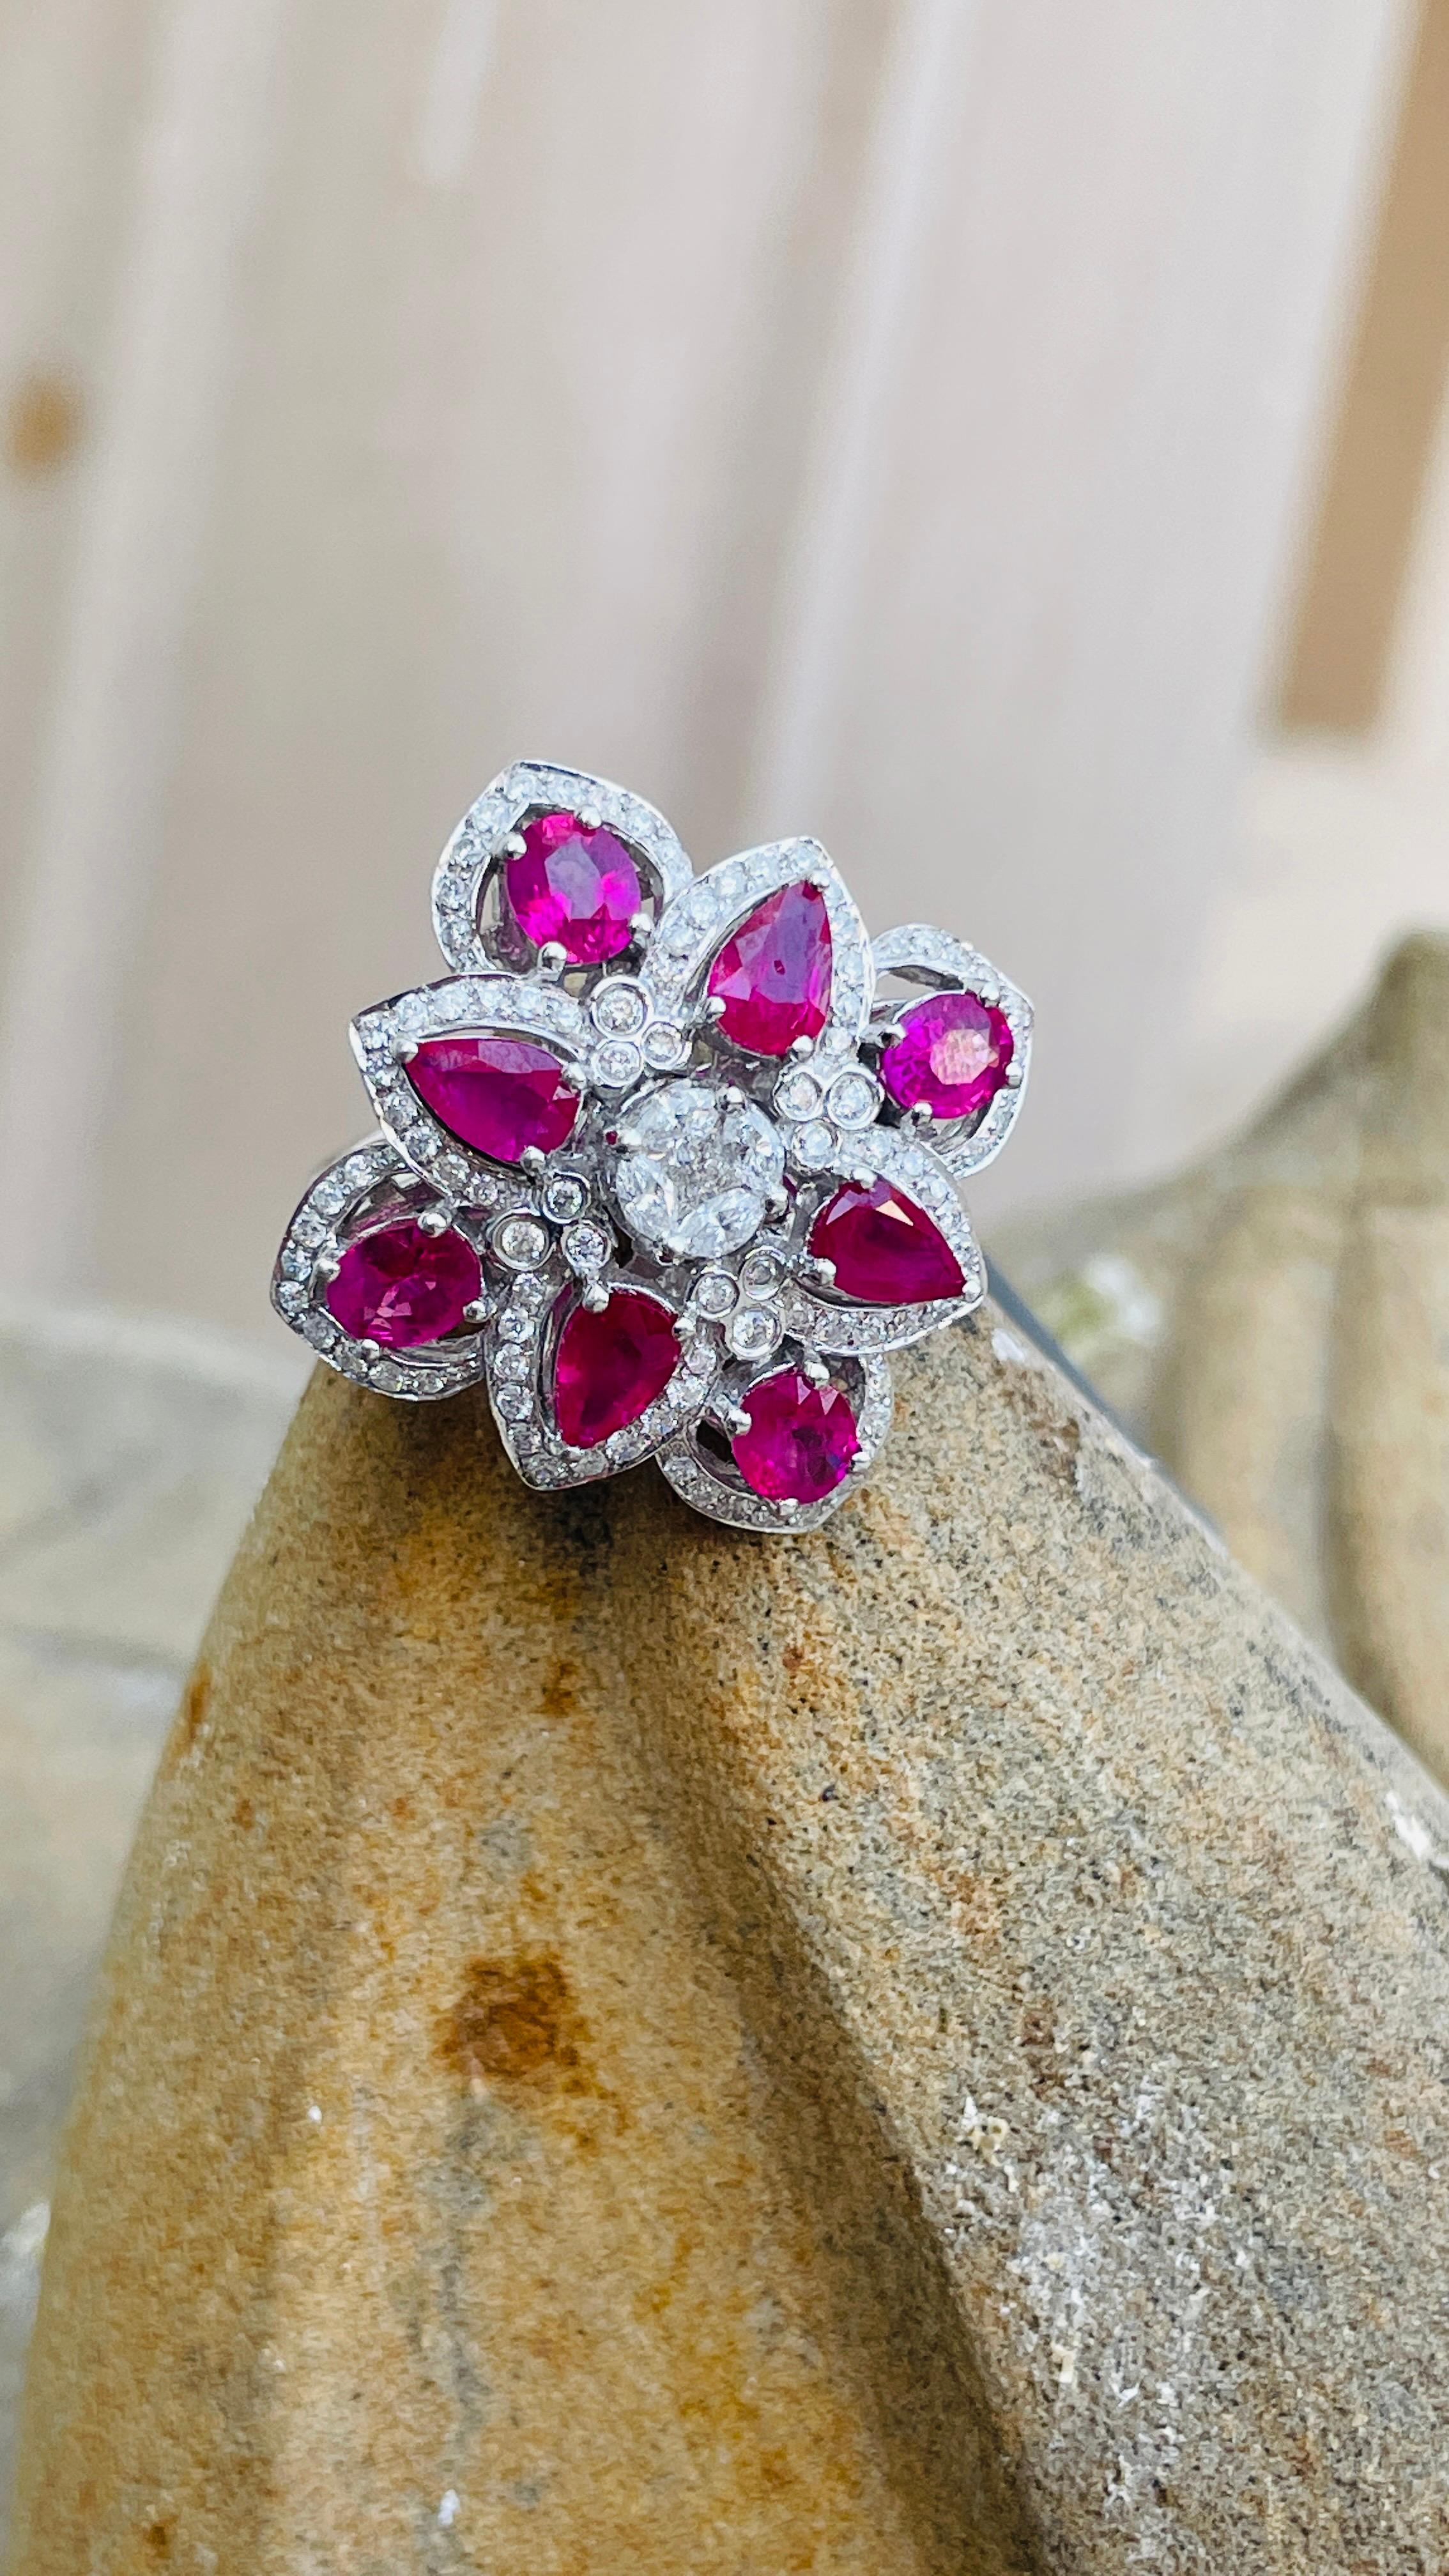 For Sale:  3.45 Carat Ruby and Diamond White Gold Ring in 14 Karat White Gold  7